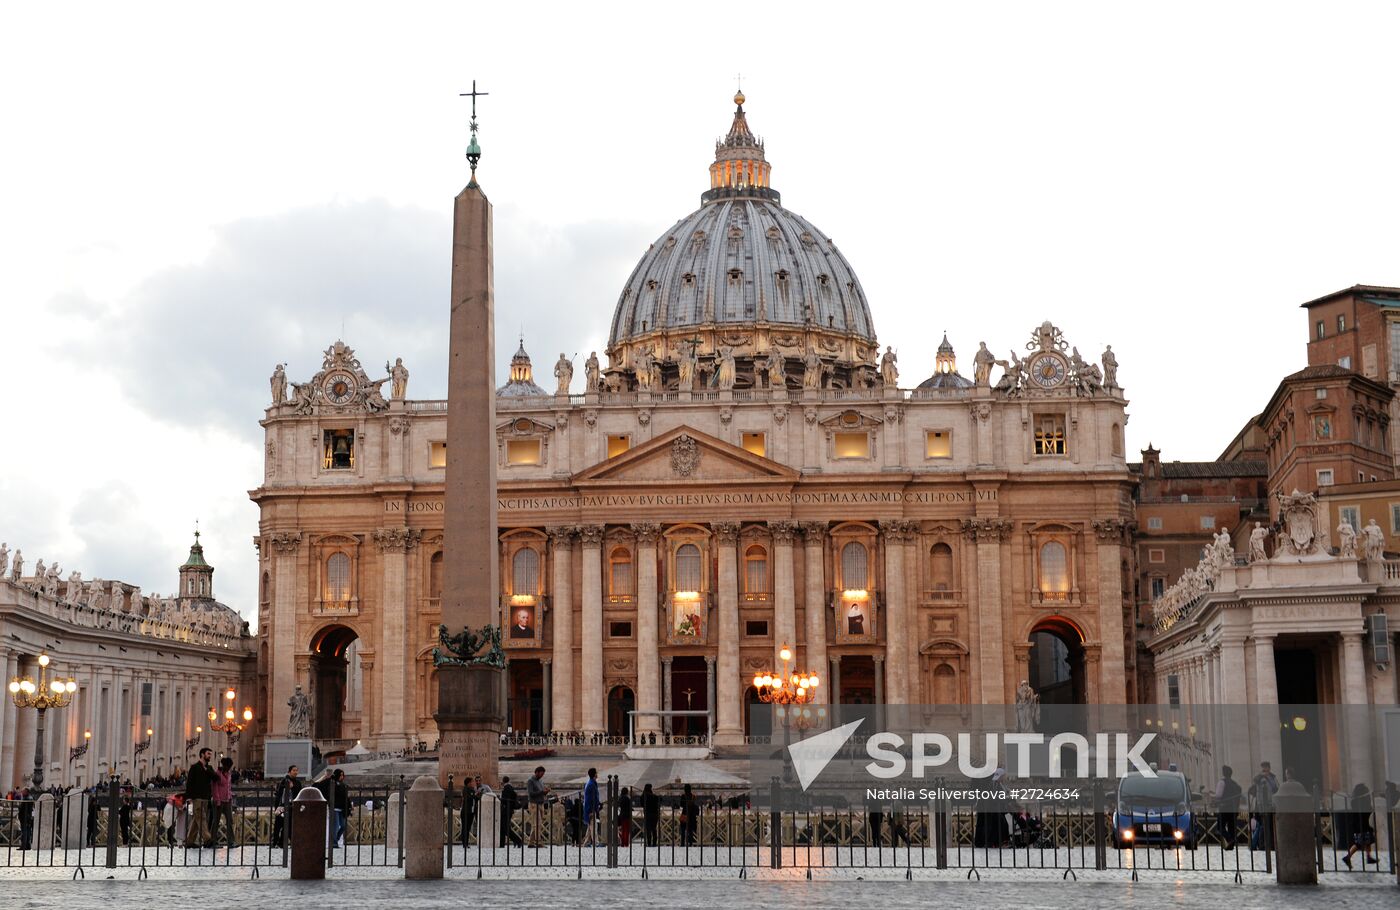 Cities of the world. Vatican City